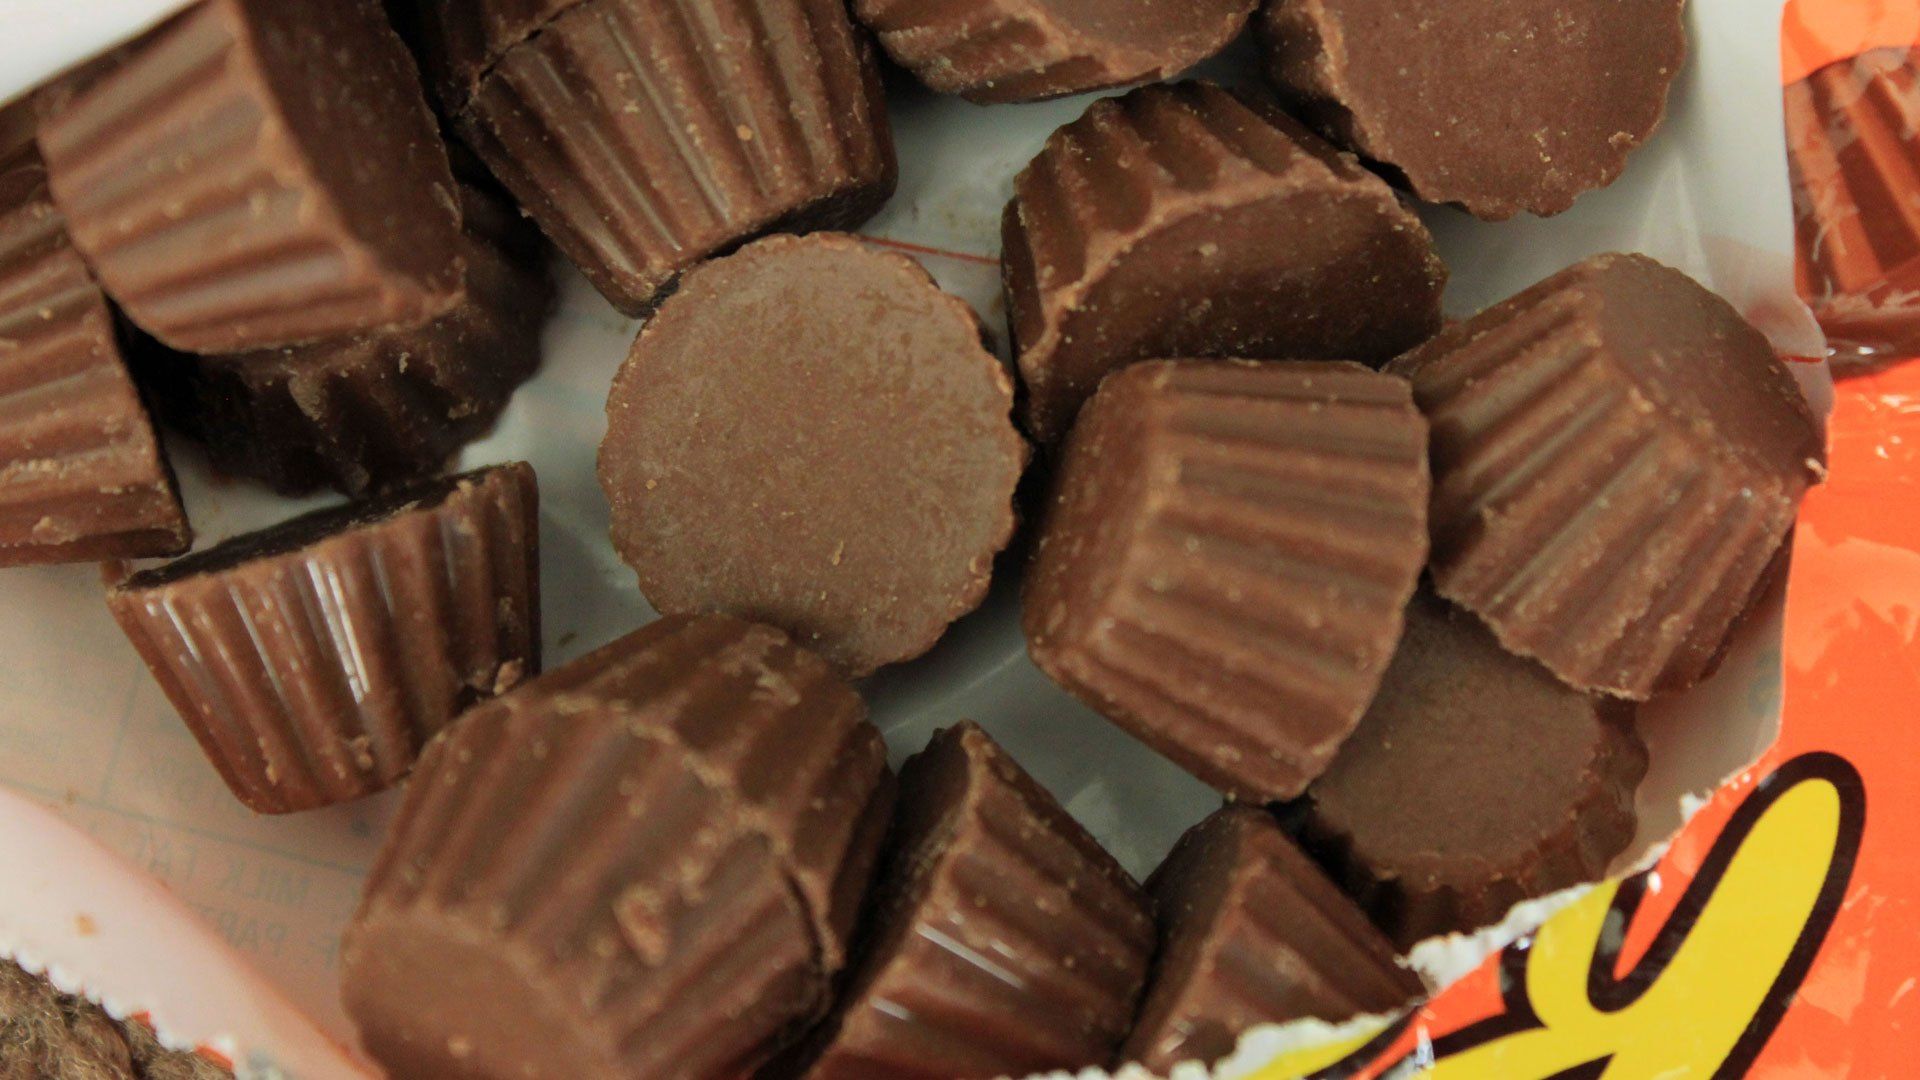 Reese's Peanut Butter Cups are America's favorite Halloween candy